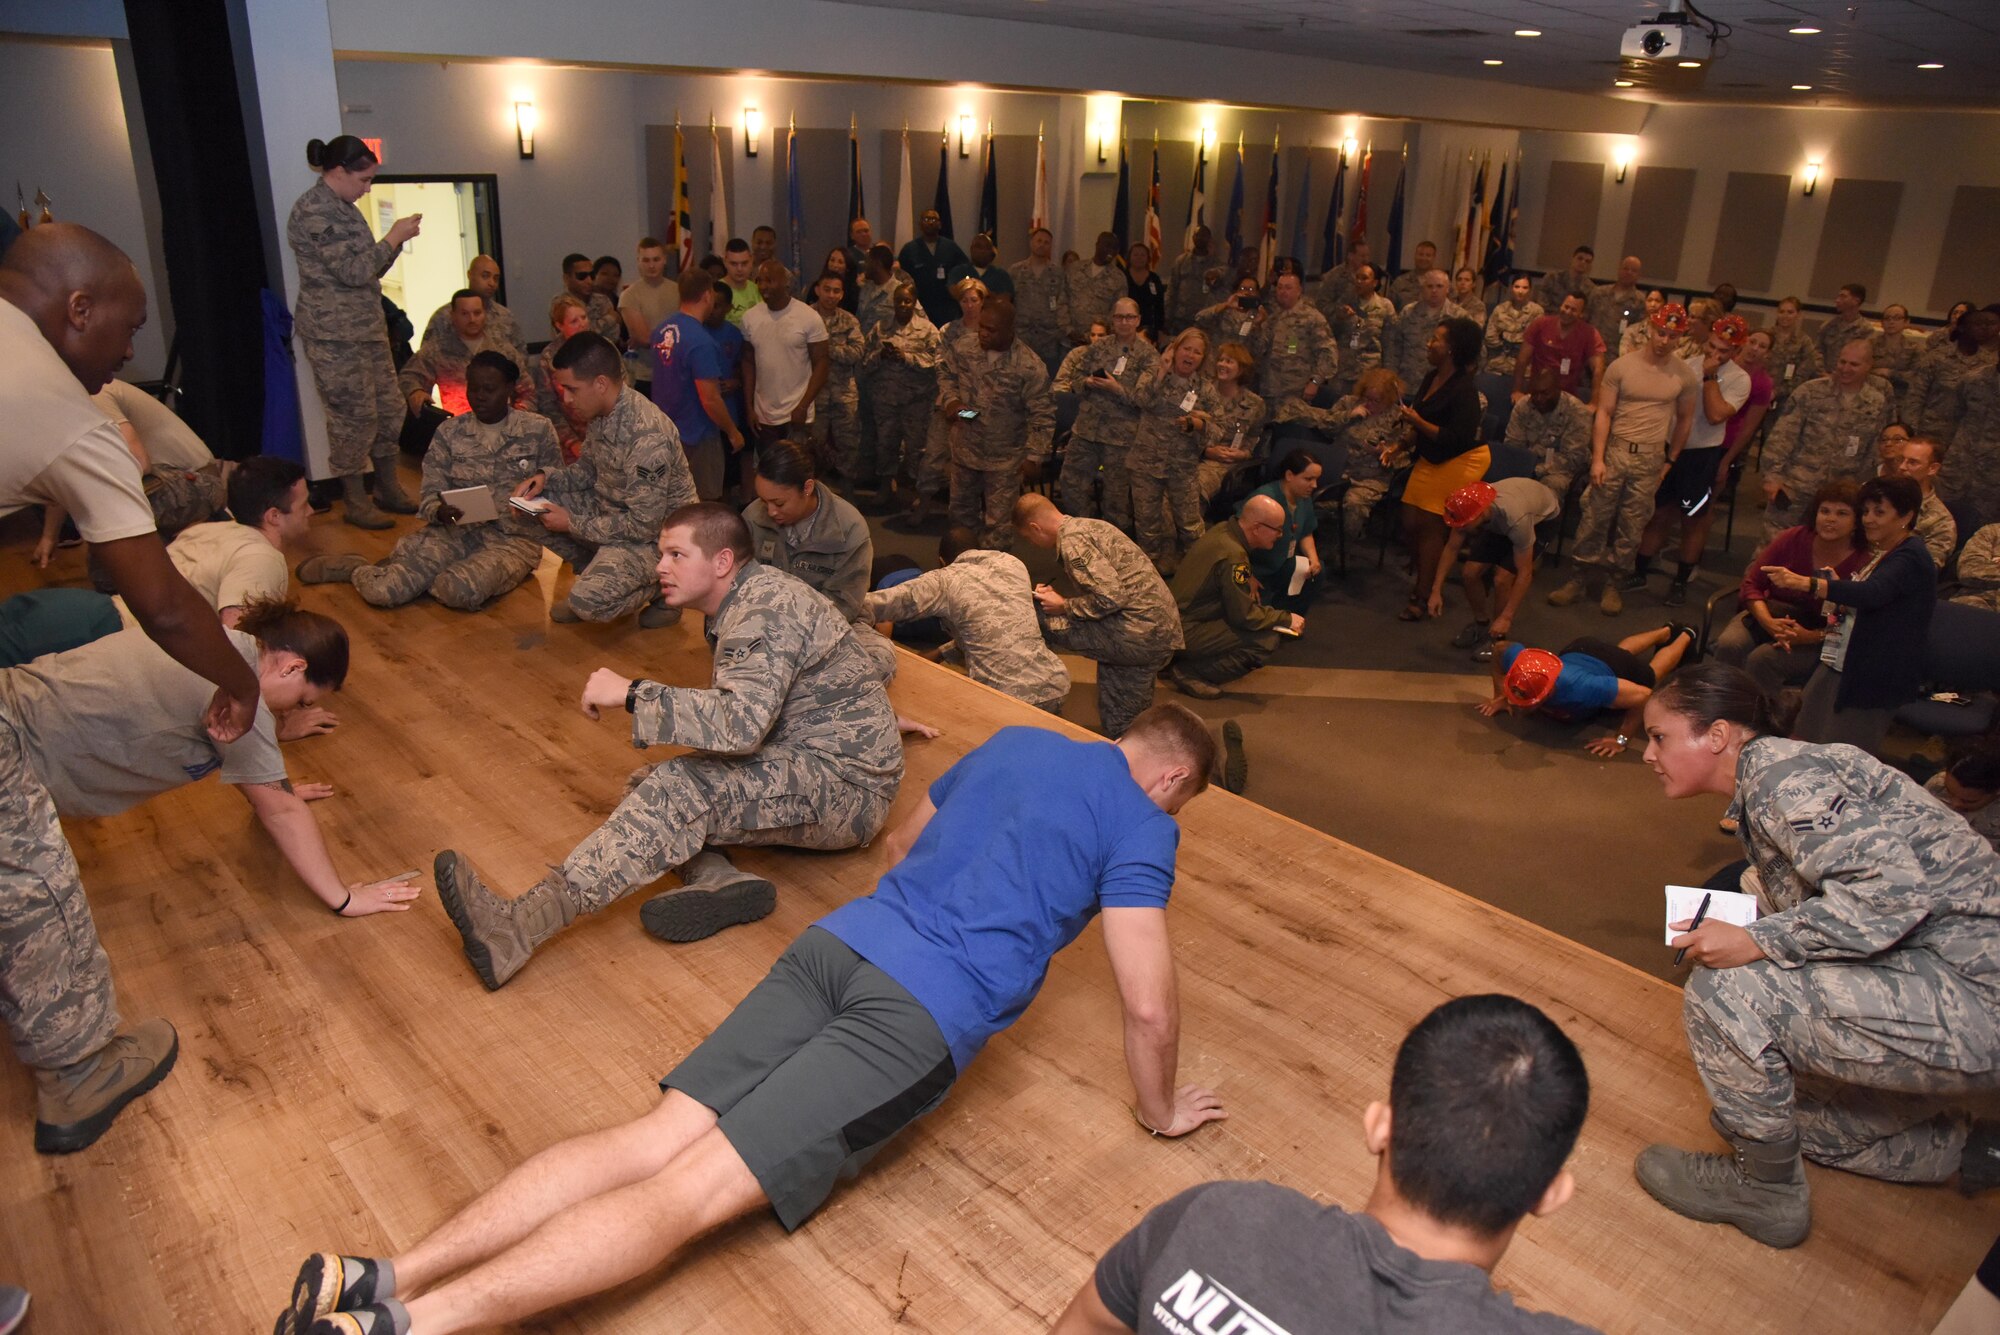 Members of the 81st Medical Group participate in the 81st MDG Push-up Competition at the Keesler Medical Center Don Wylie Auditorium Nov. 1, 2016, on Keesler Air Force Base, Miss. Seven five-person teams competed in the event pushing out a total of 6,272 push-ups. The 81st Dental Squadron was this year’s winner with 1,127 push-ups. The Airmen who participated in the event raised money to support the Krewe of Medics Mardi Gras Ball. (U.S. Air Force photo by Kemberly Groue/Released)
